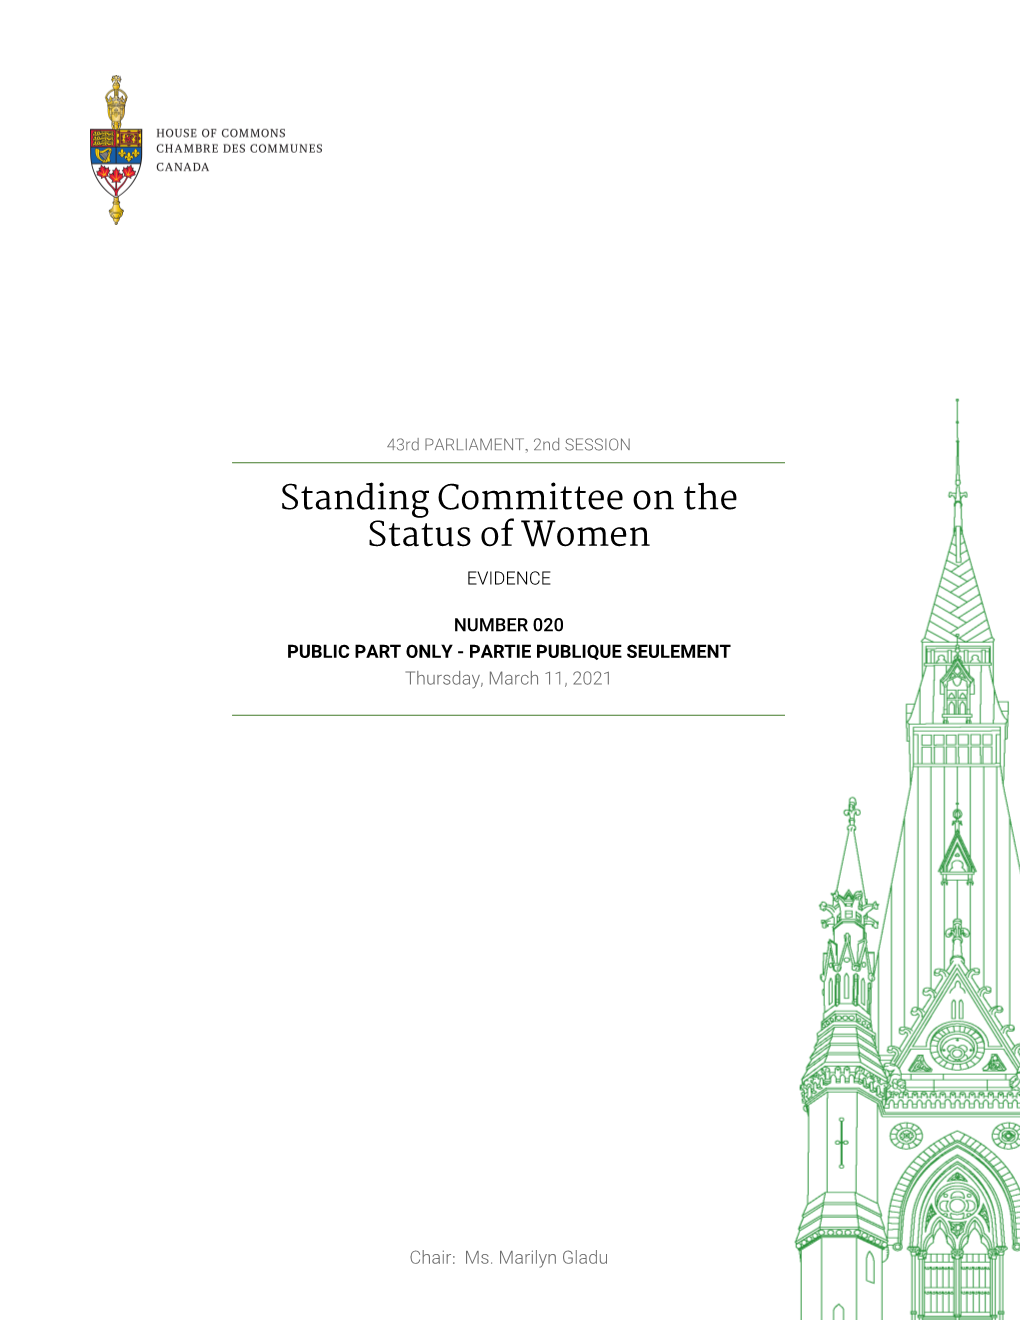 Evidence of the Standing Committee on the Status of Women